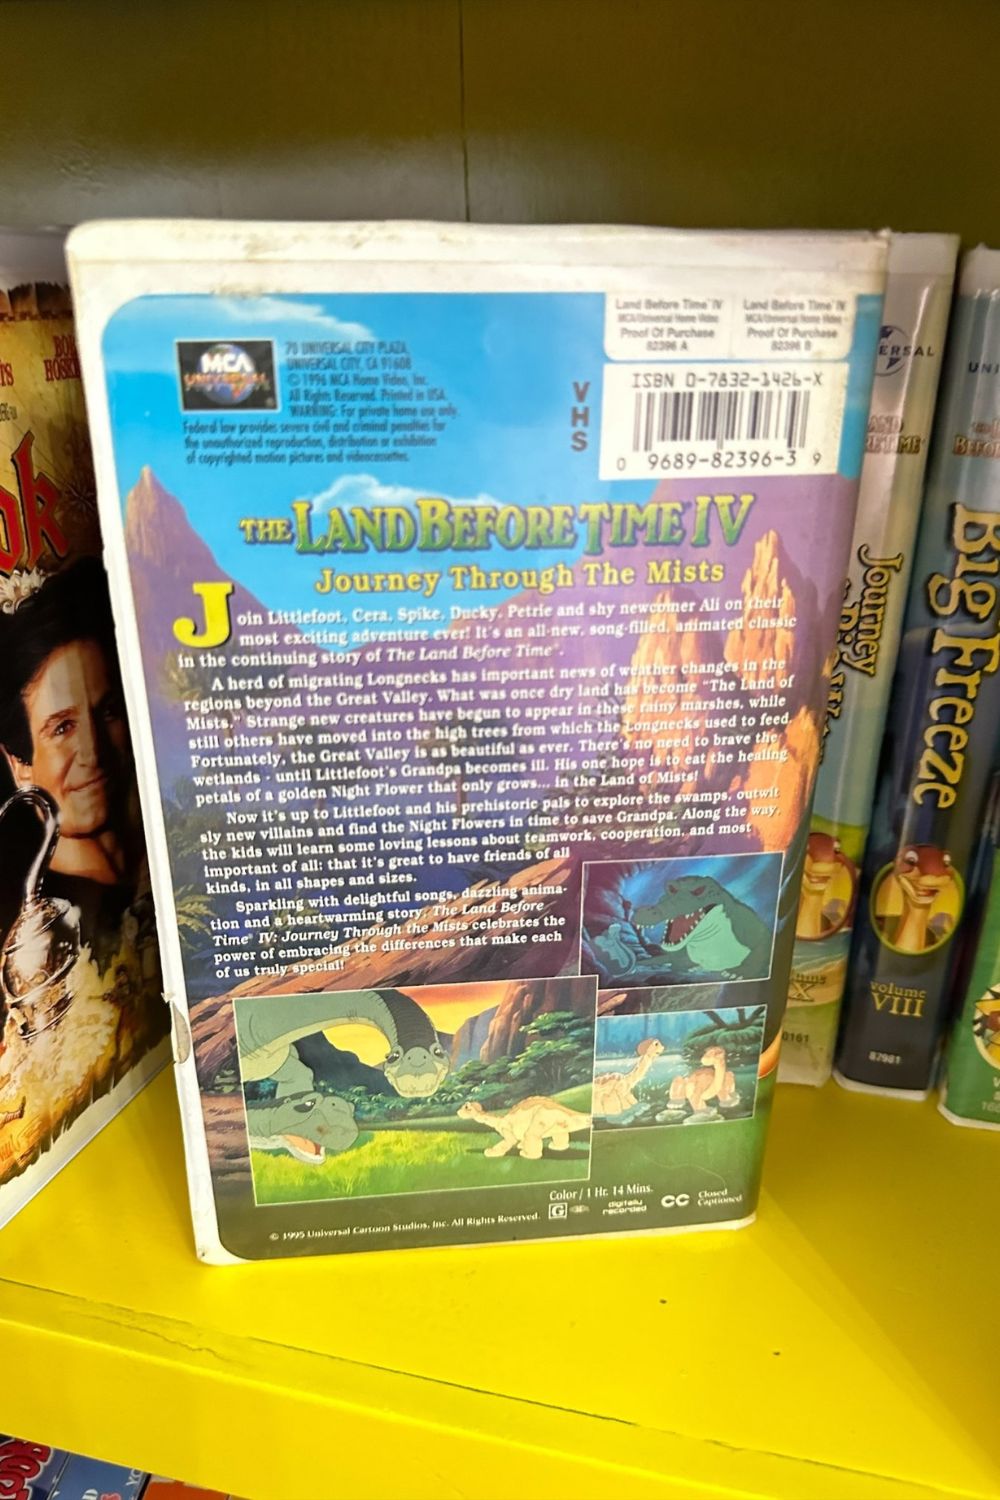 THE LAND BEFORE TIME IV: JOURNEY THROUGH THE MISTS VHS*